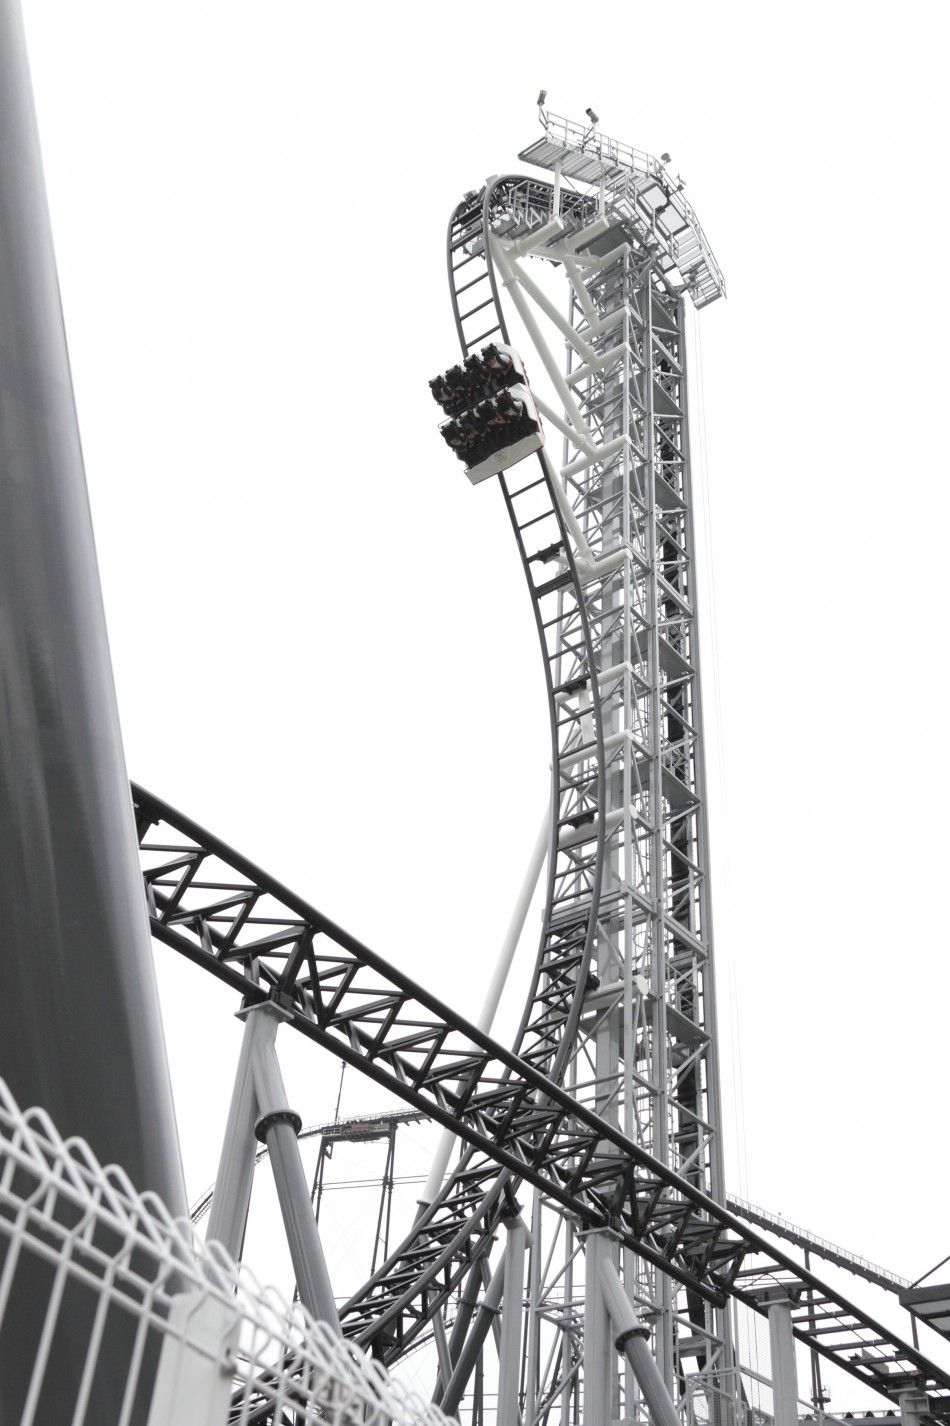 Handout picture of the worlds steepest roller coaster quotTakabishaquot with a free falling angle of 121 degrees